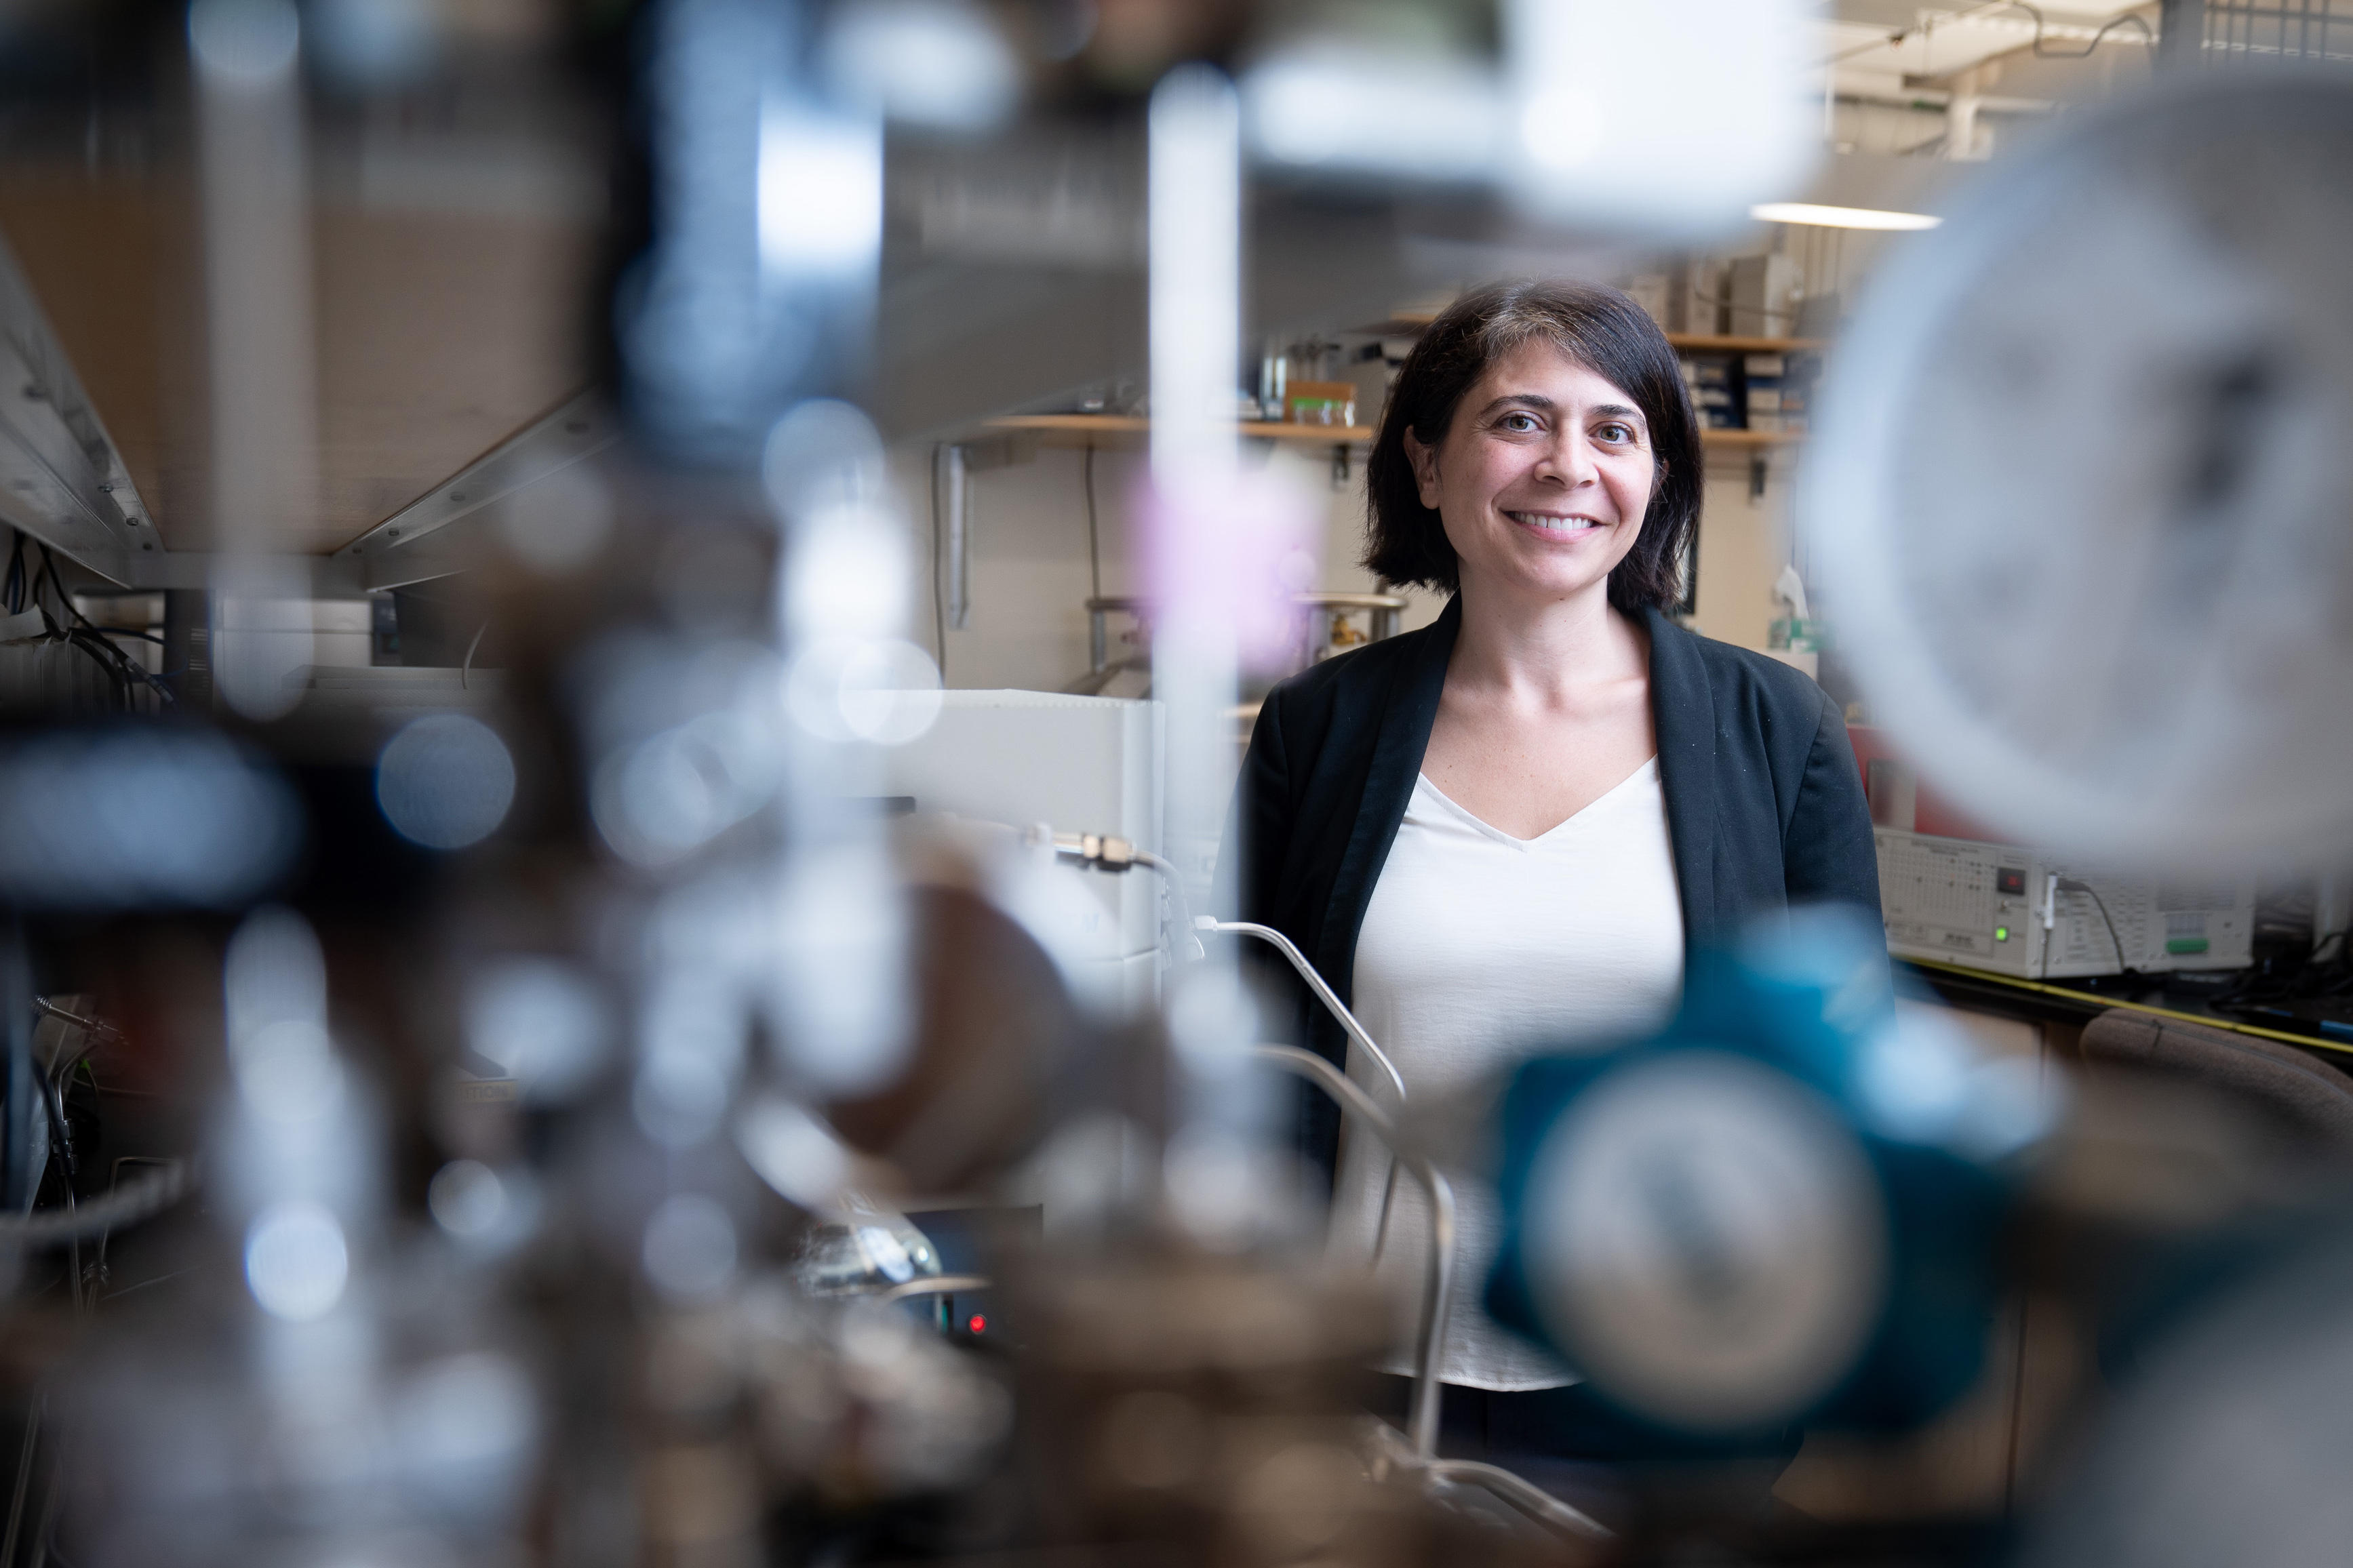 MIT Professor Desirée Plata's efforts extend far beyond research and include mentoring students, entrepreneurship, coalition-building, and coordination across industry, academia, and government.